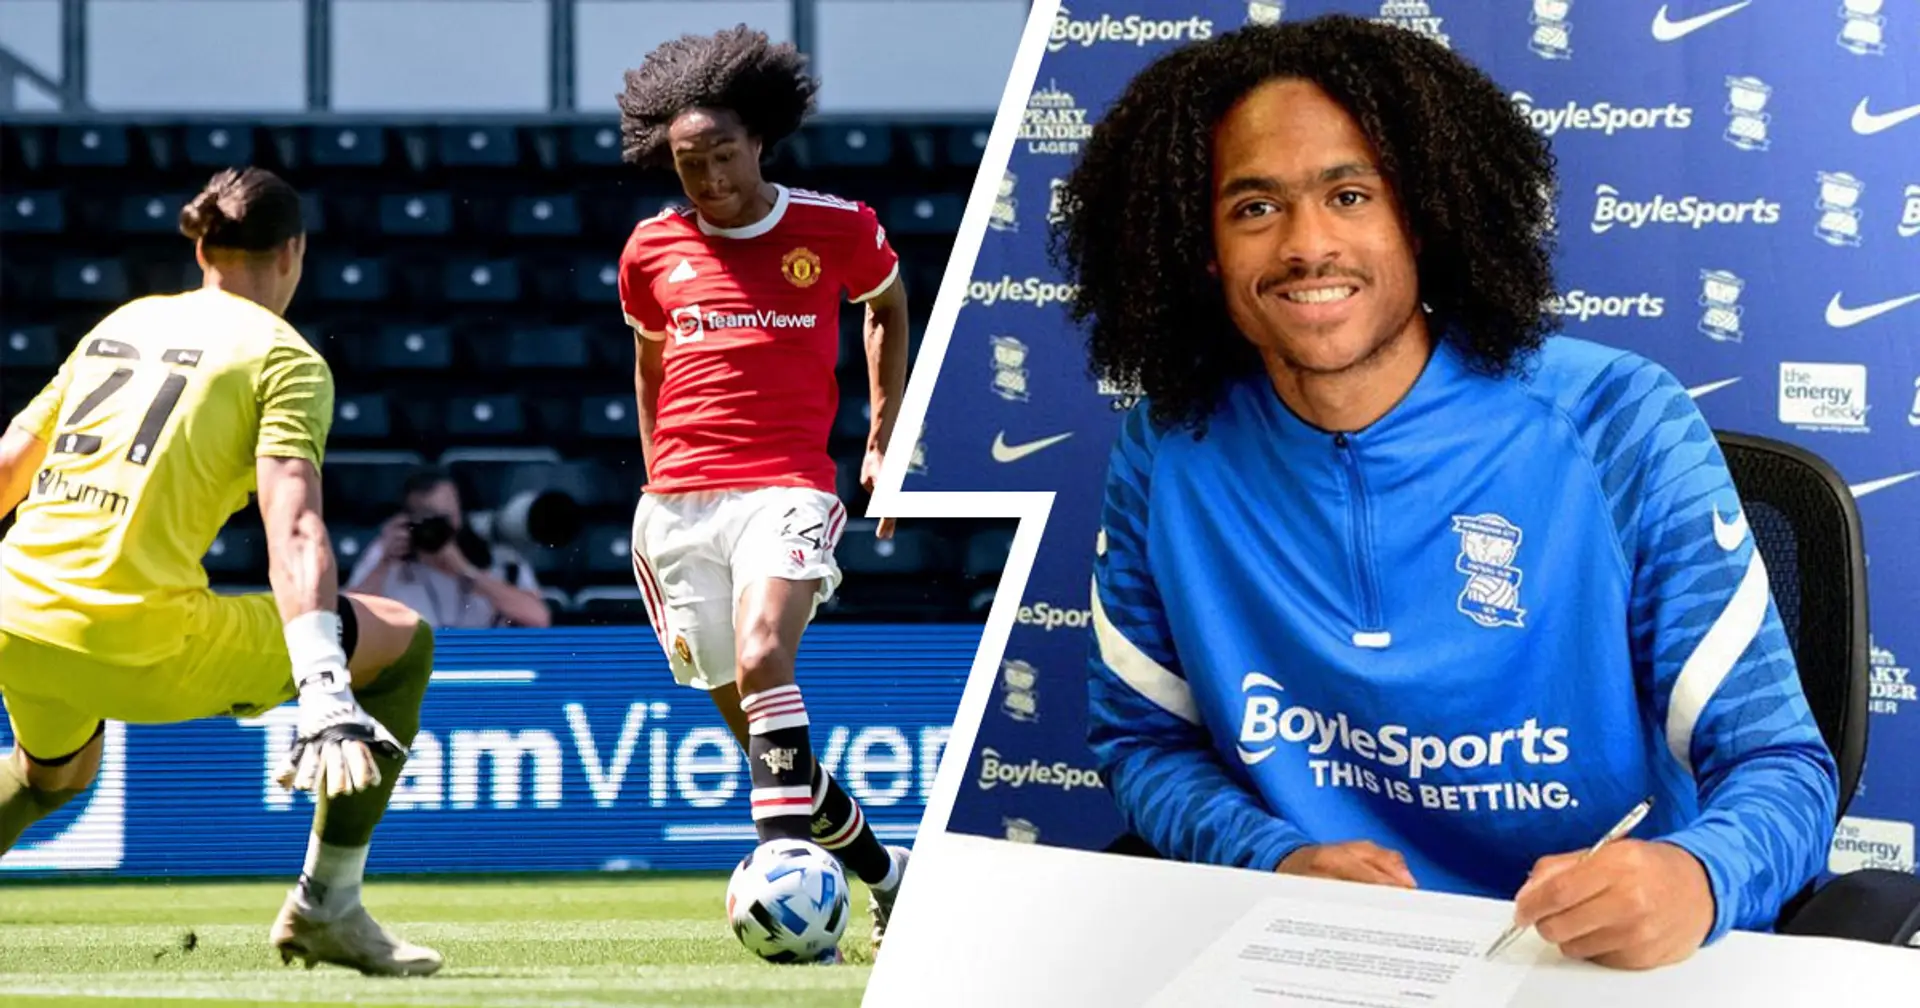 Explained: Why Chong is spending pre-season with United despite being loaned to Birmingham City